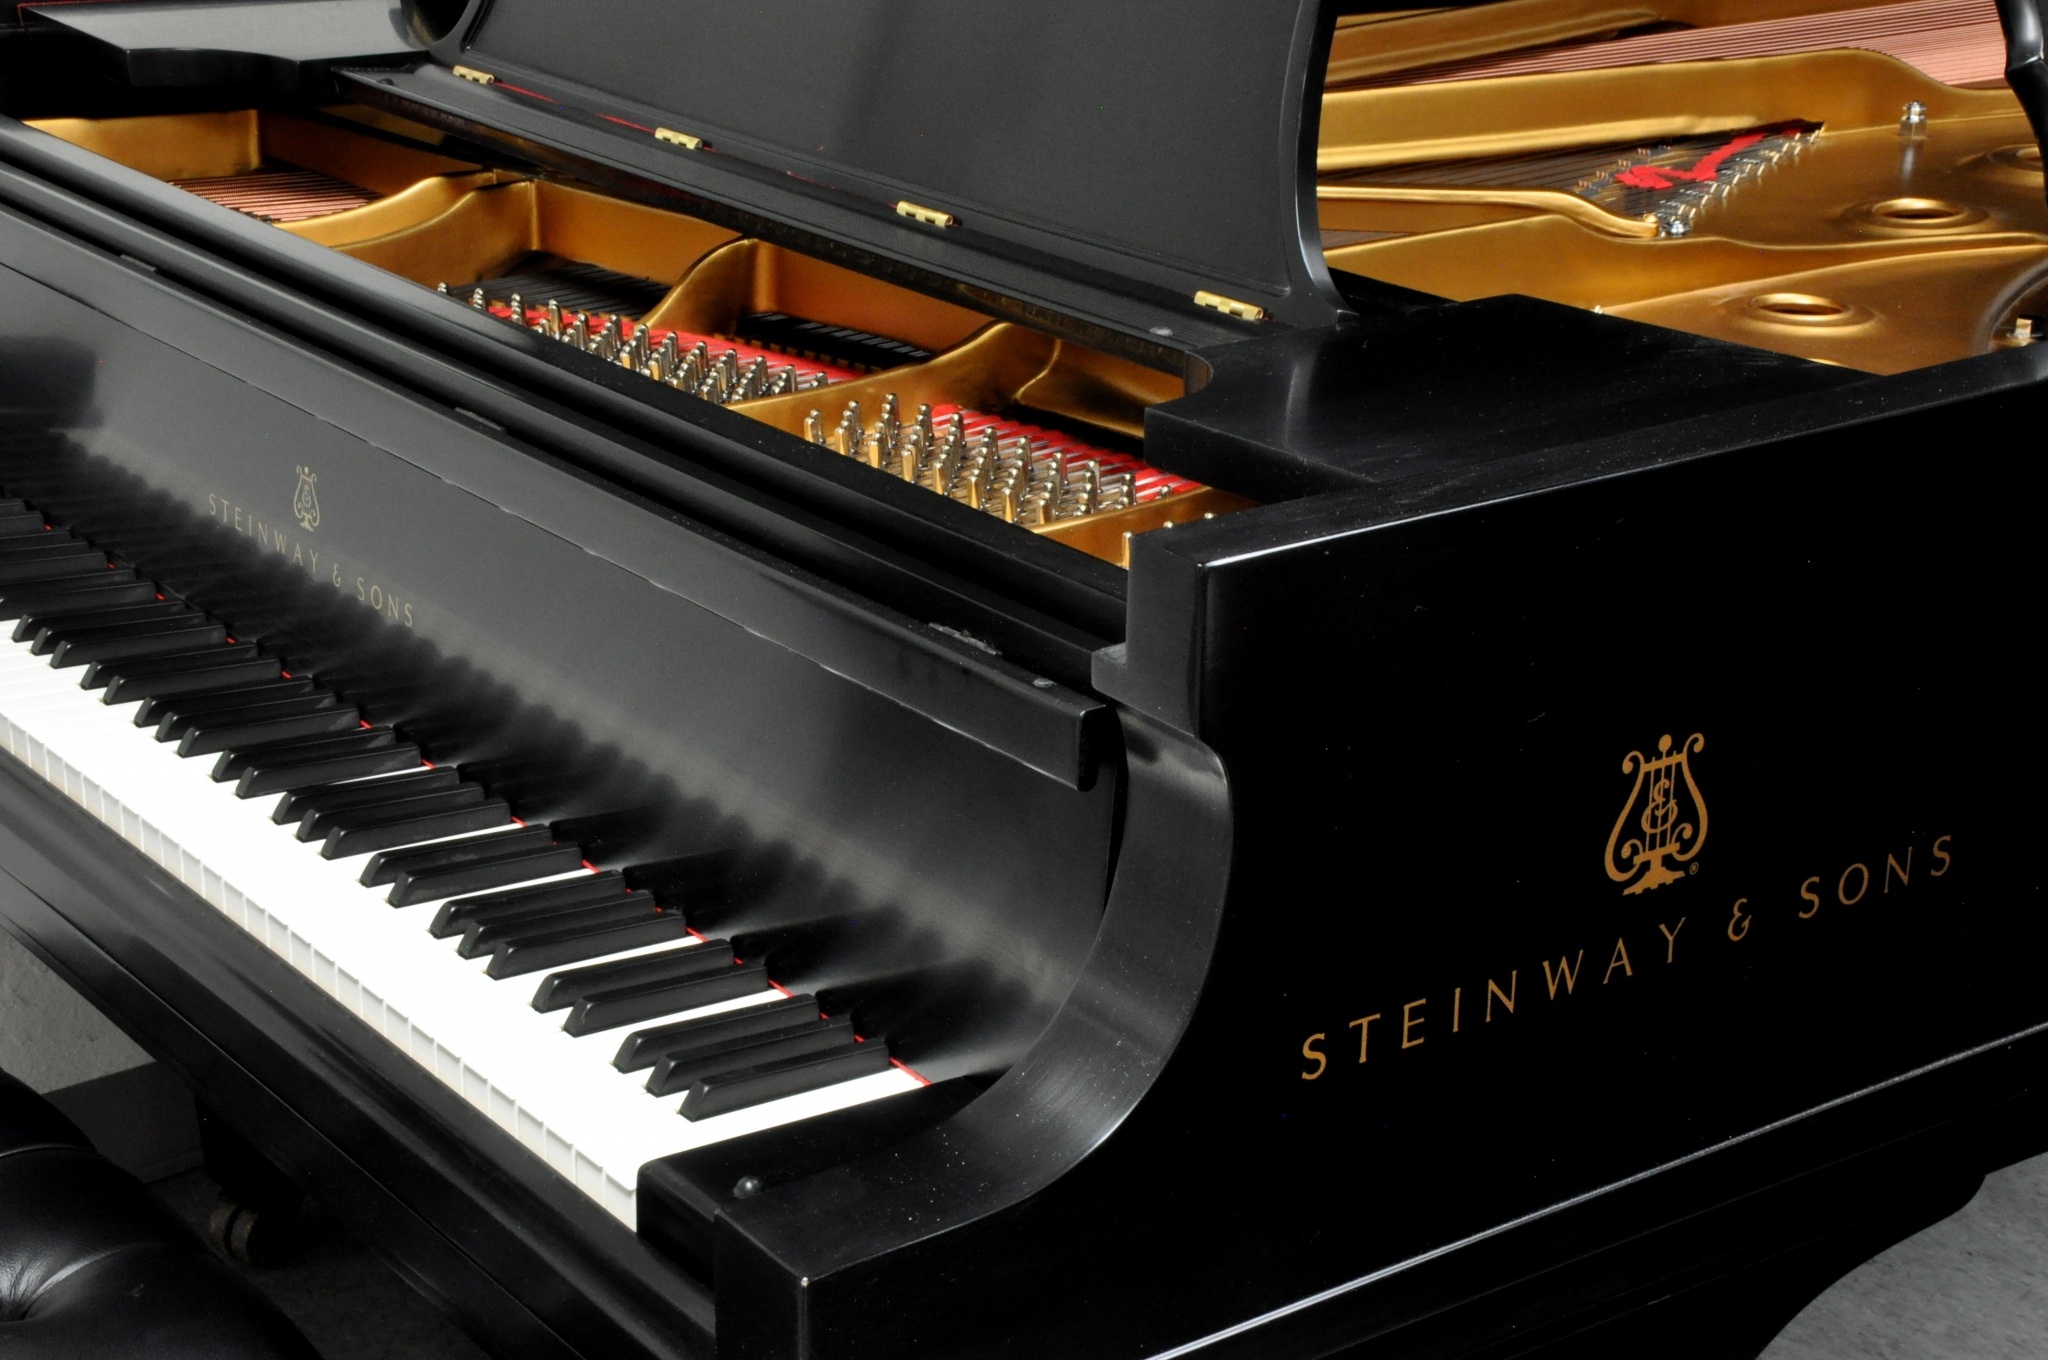 Fortepiano: Steinway, Keyboards And A Pedal Clavier, Operated By The Player’s Hands And Feet. 2050x1360 HD Wallpaper.